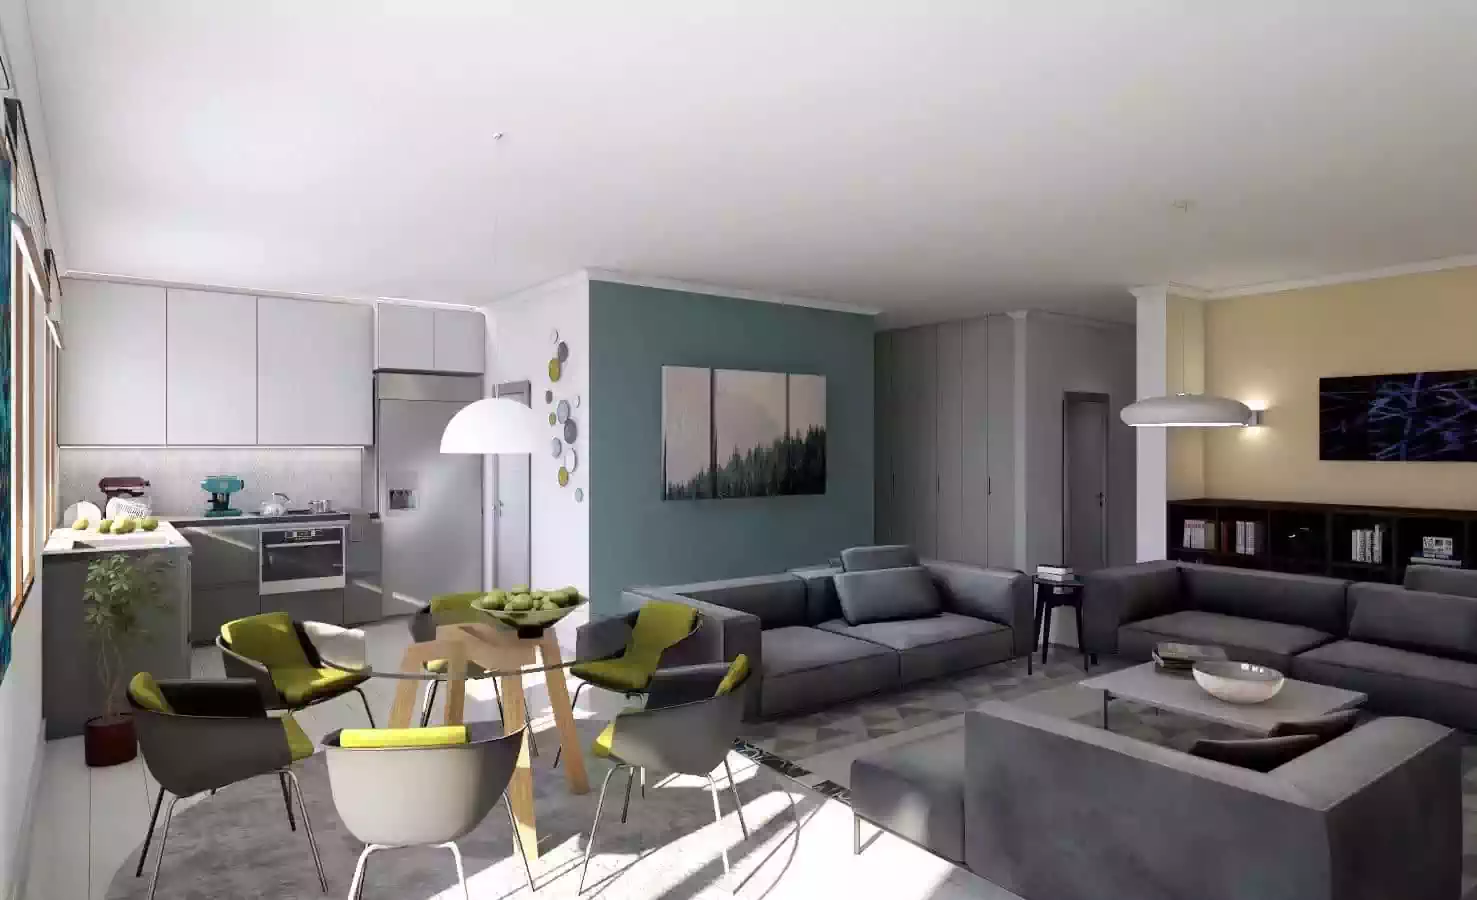 Open plan townhouse apartment with living, dining and kitchen in one space. Pastel colours and greys give a modern feel